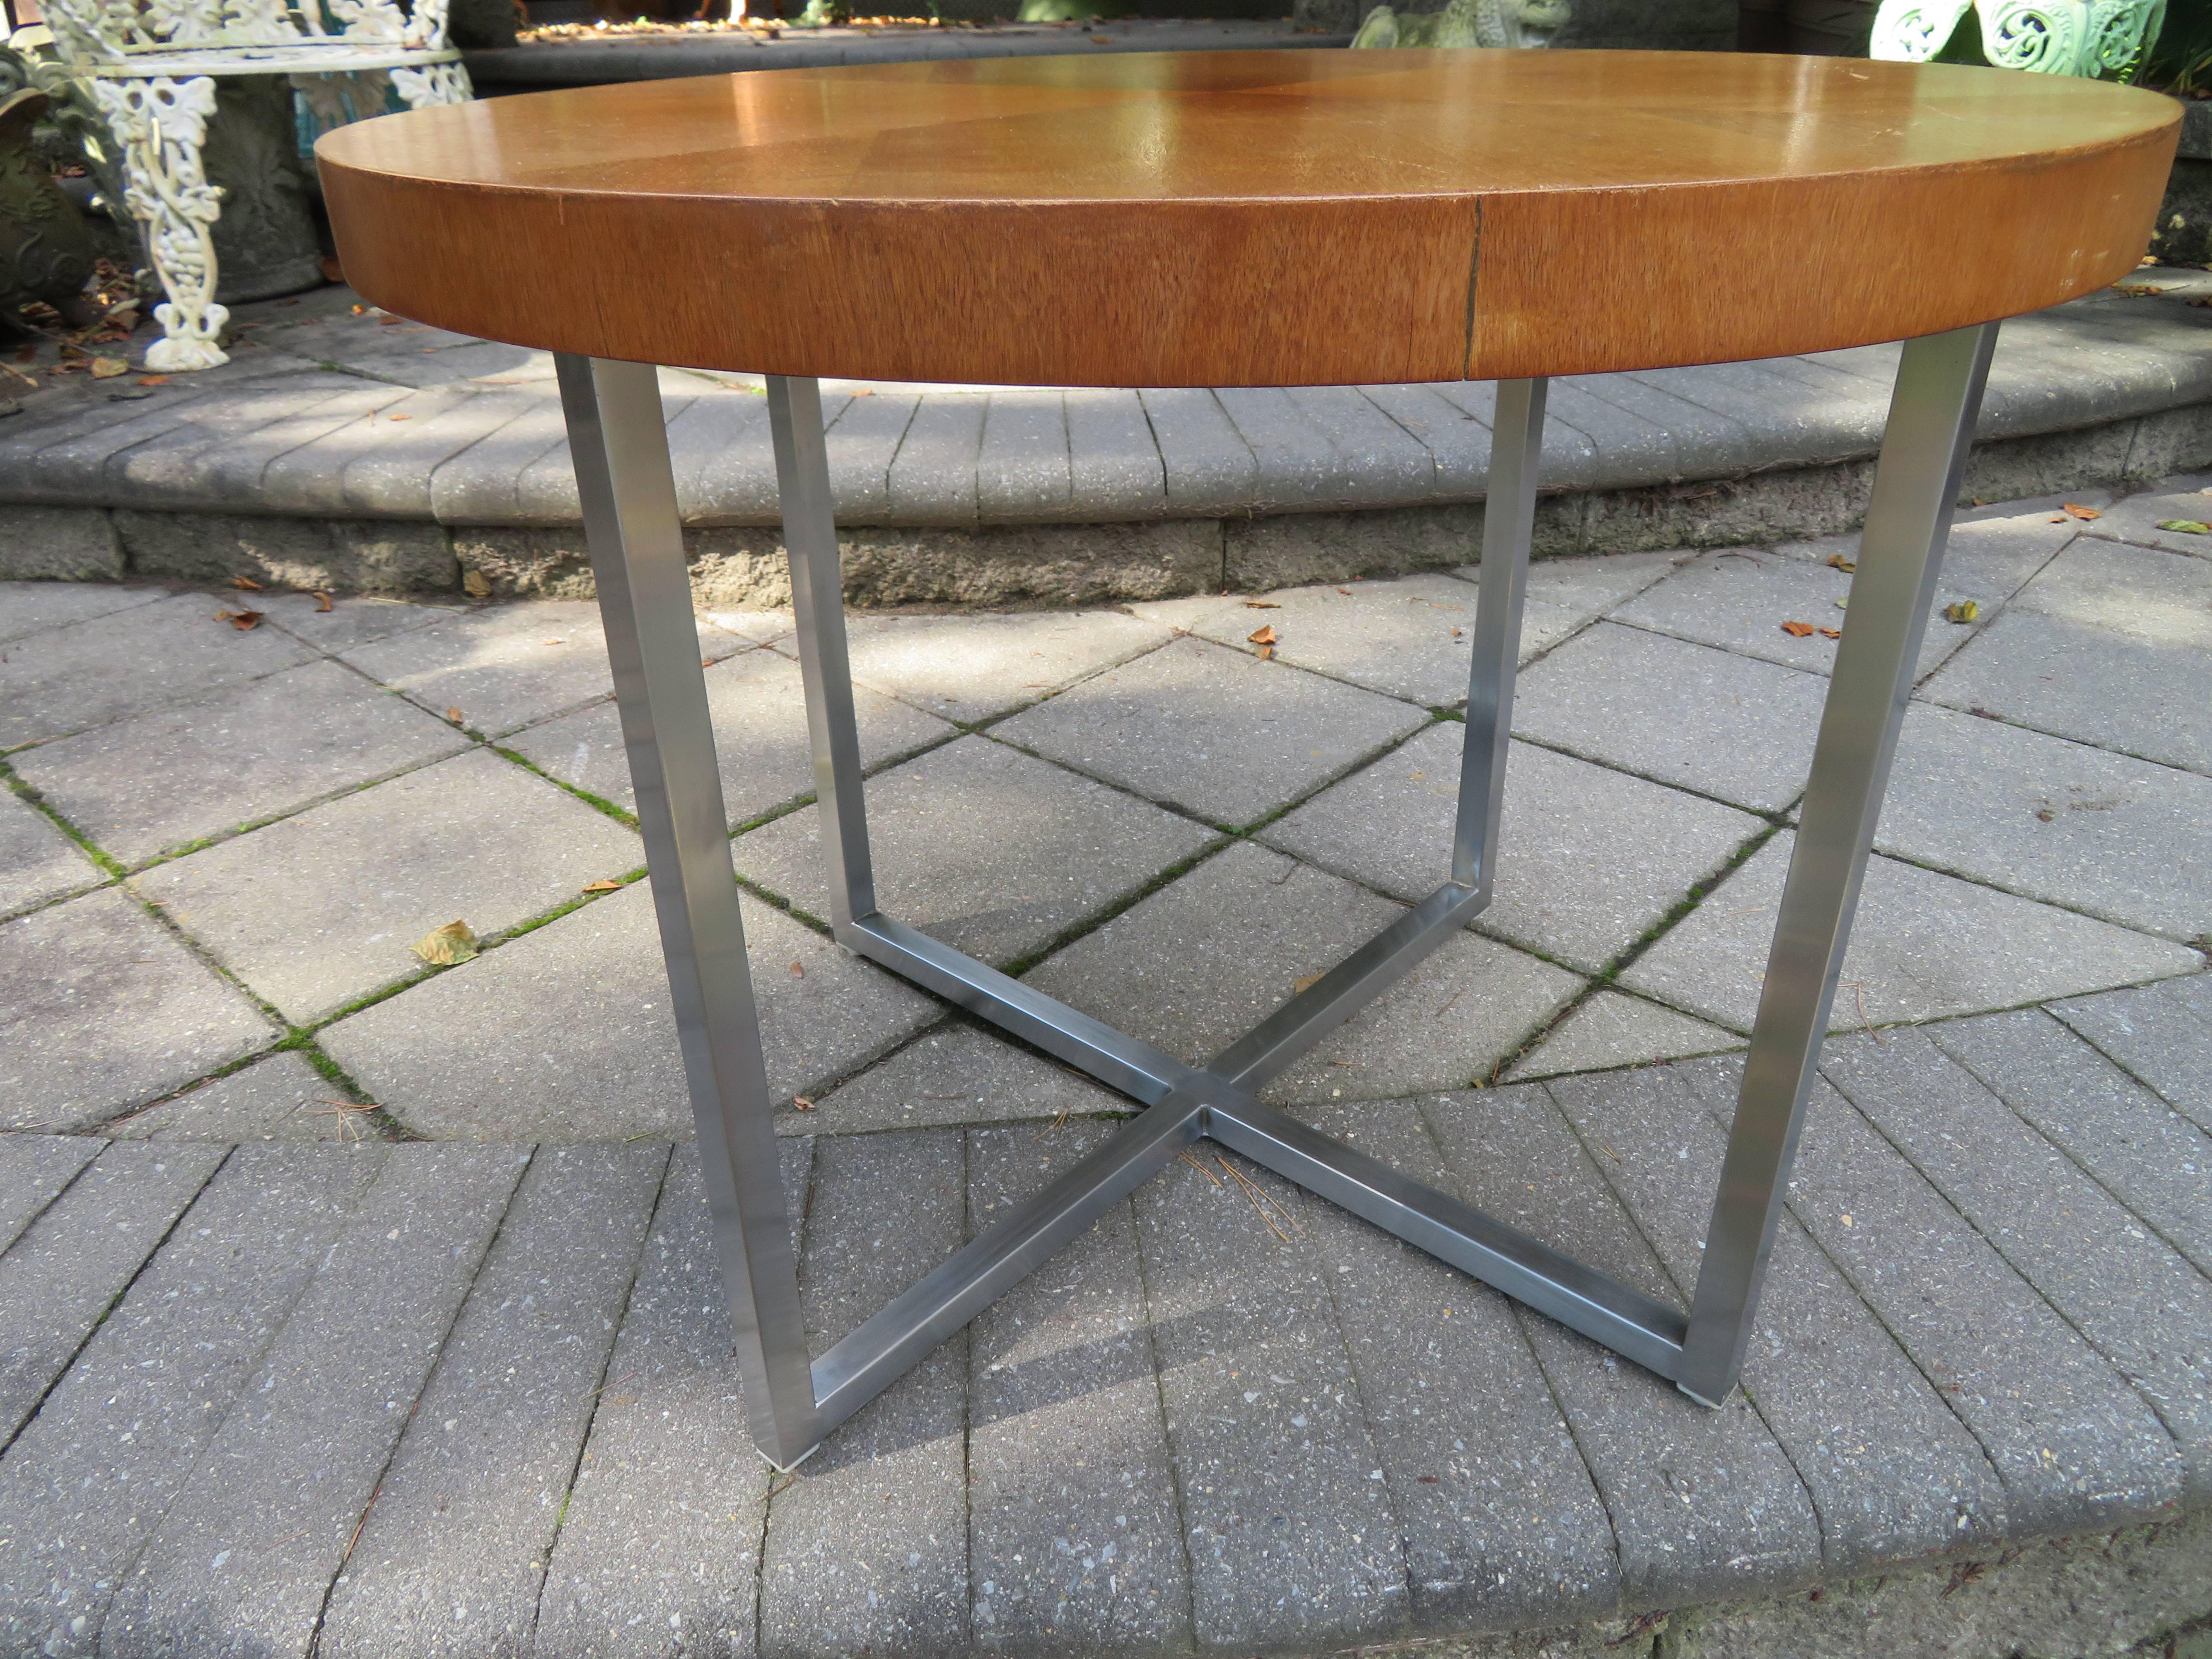 Lovely Milo Baughman style brushed chrome X-base side table. The top is a light teak and has a nice vintage honey patina.